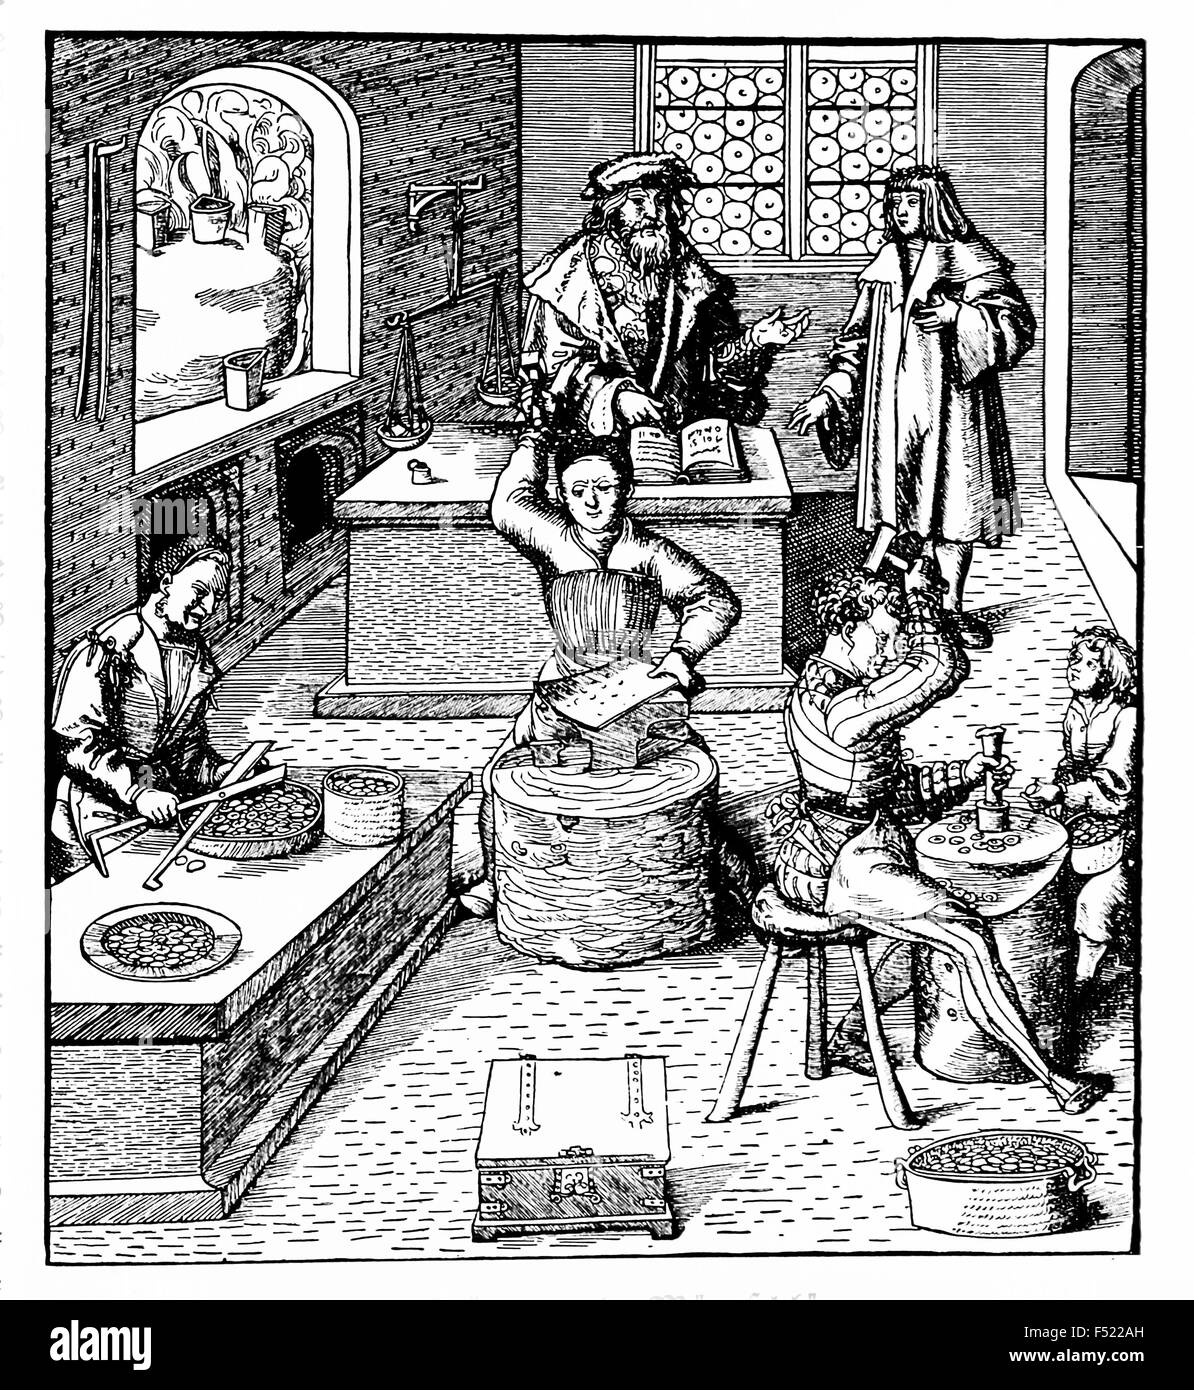 Vintage engraving depicting the work of making coins in a Middle Ages workshop Stock Photo